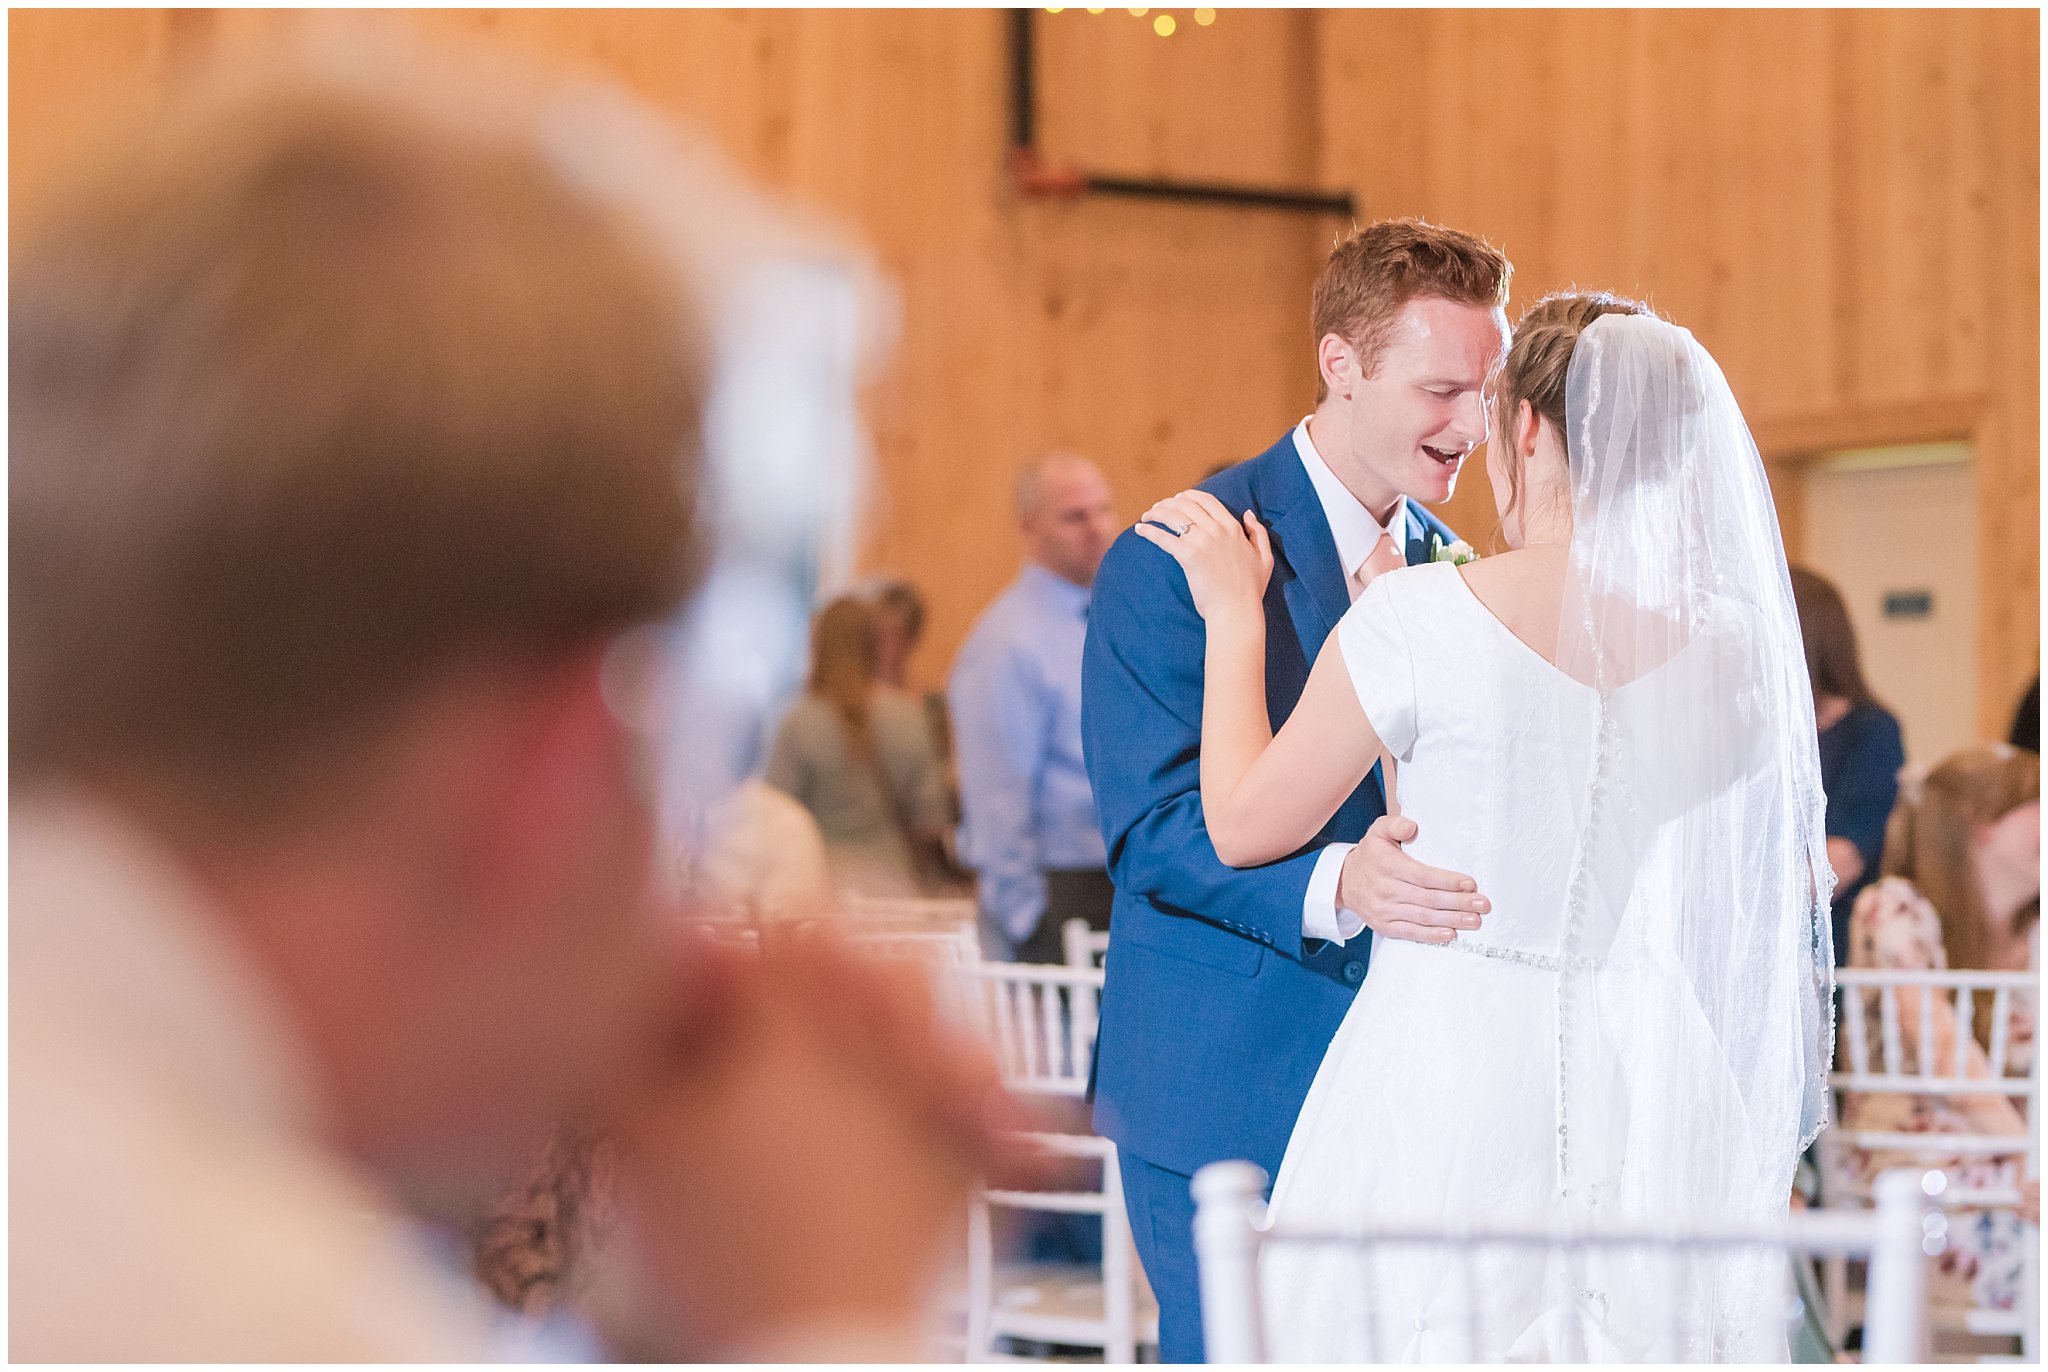 Bride and groom candid first dance moments | Oak Hills Reception and Events Center | Jessie and Dallin Photography